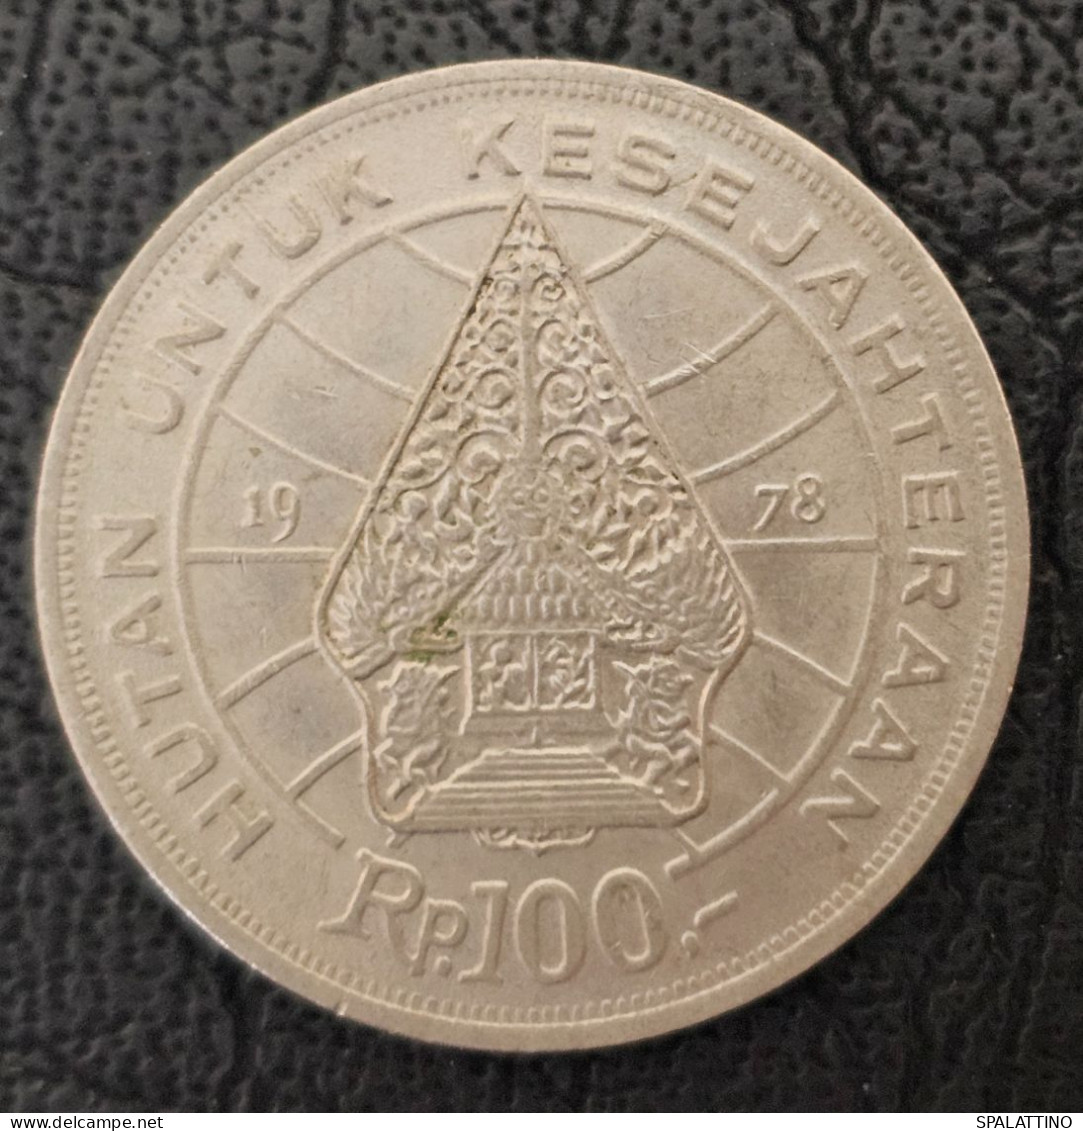 INDONESIA- 100 RUPIAH 1978. FORESTRY FOR PROSPERITY - Indonesië